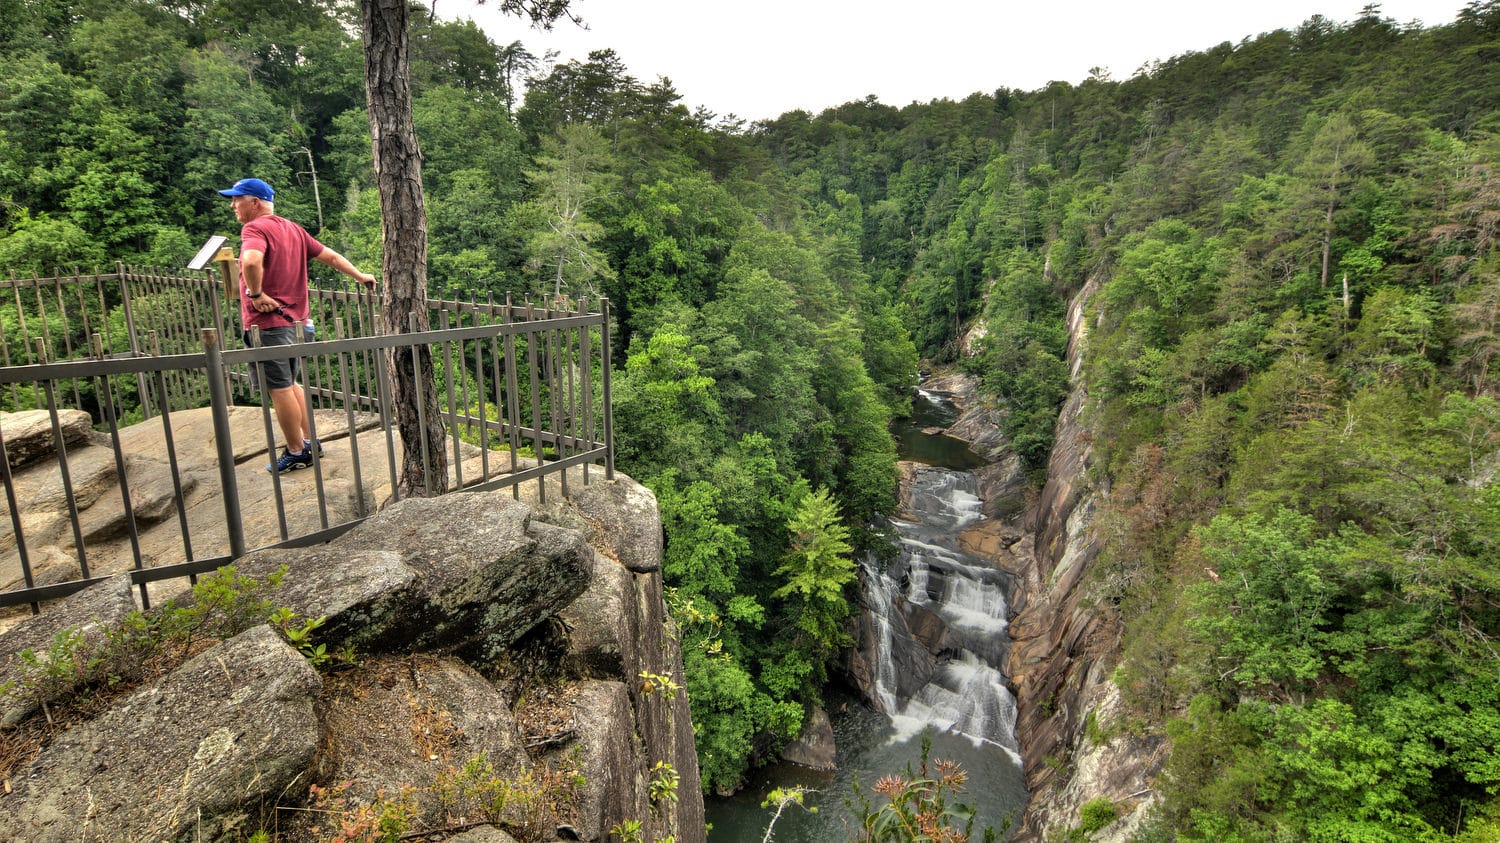 View from the North Rim Overlook into the gorge at Tallulah Gorge State Park in Tallulah Falls, GA on Monday, June 12, 2017. Copyright 2017 Jason Barnette